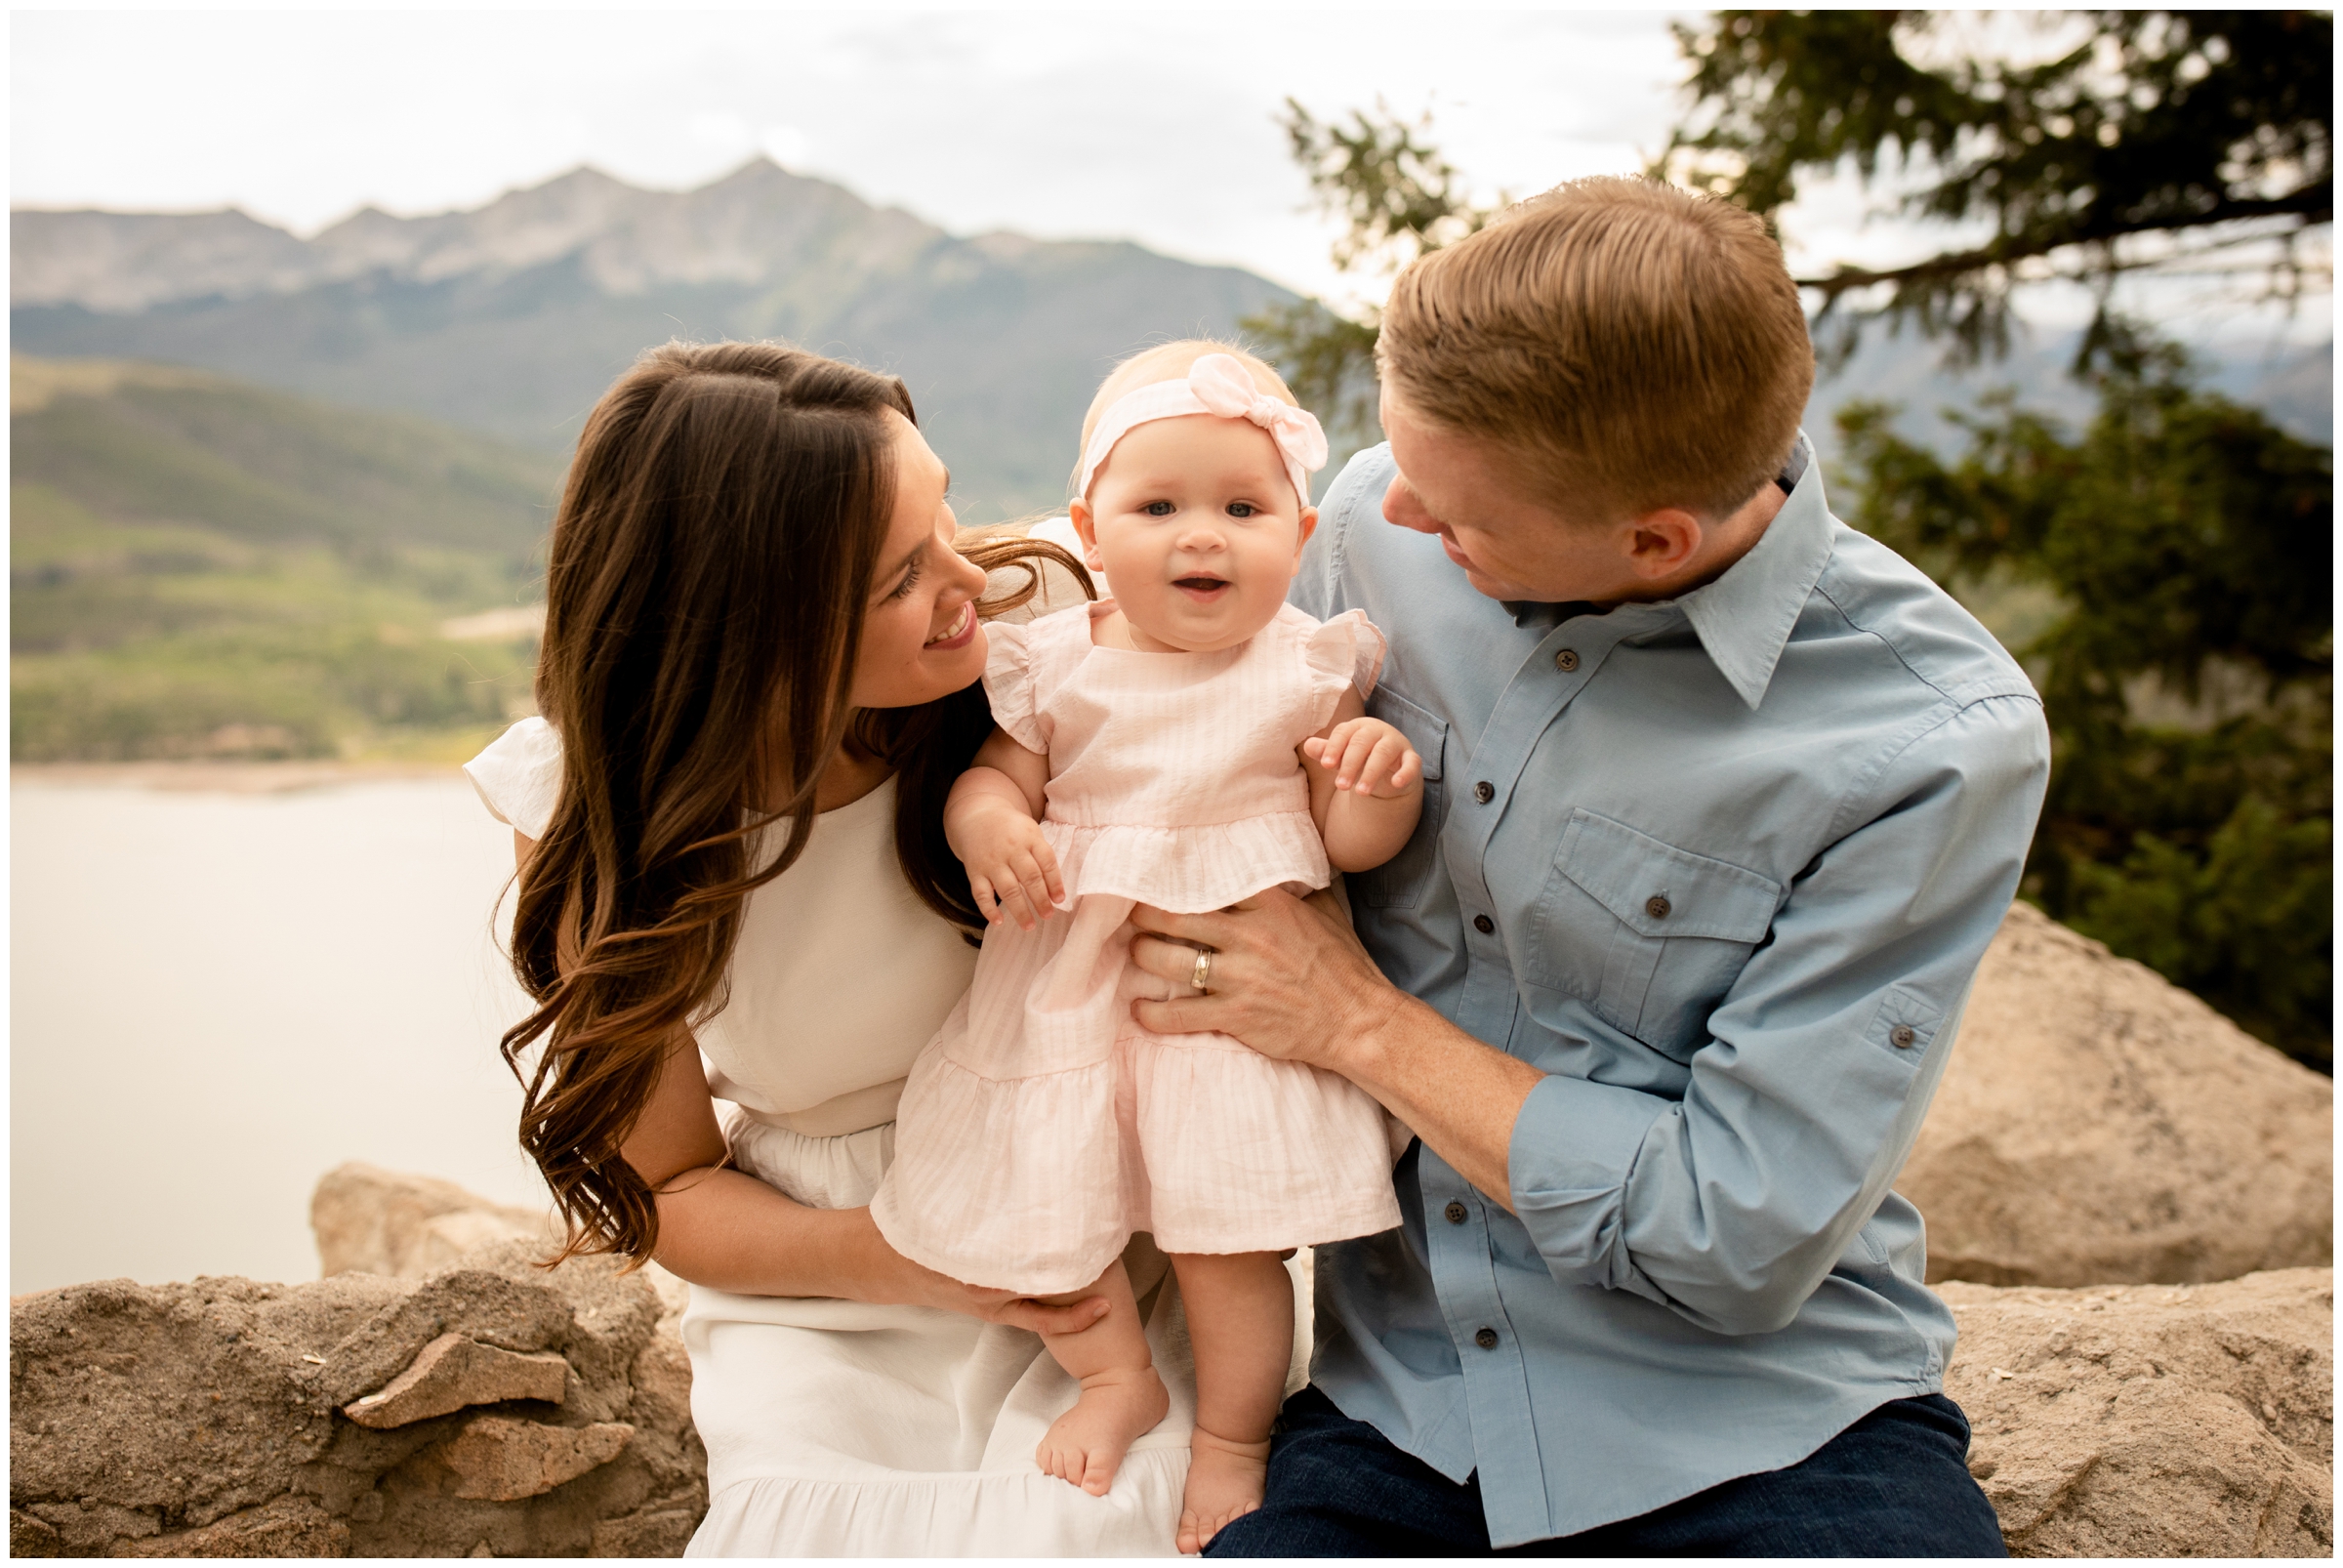 Breckenridge family portrait photography at Sapphire Point by Colorado mountain photographer Plum Pretty Photography